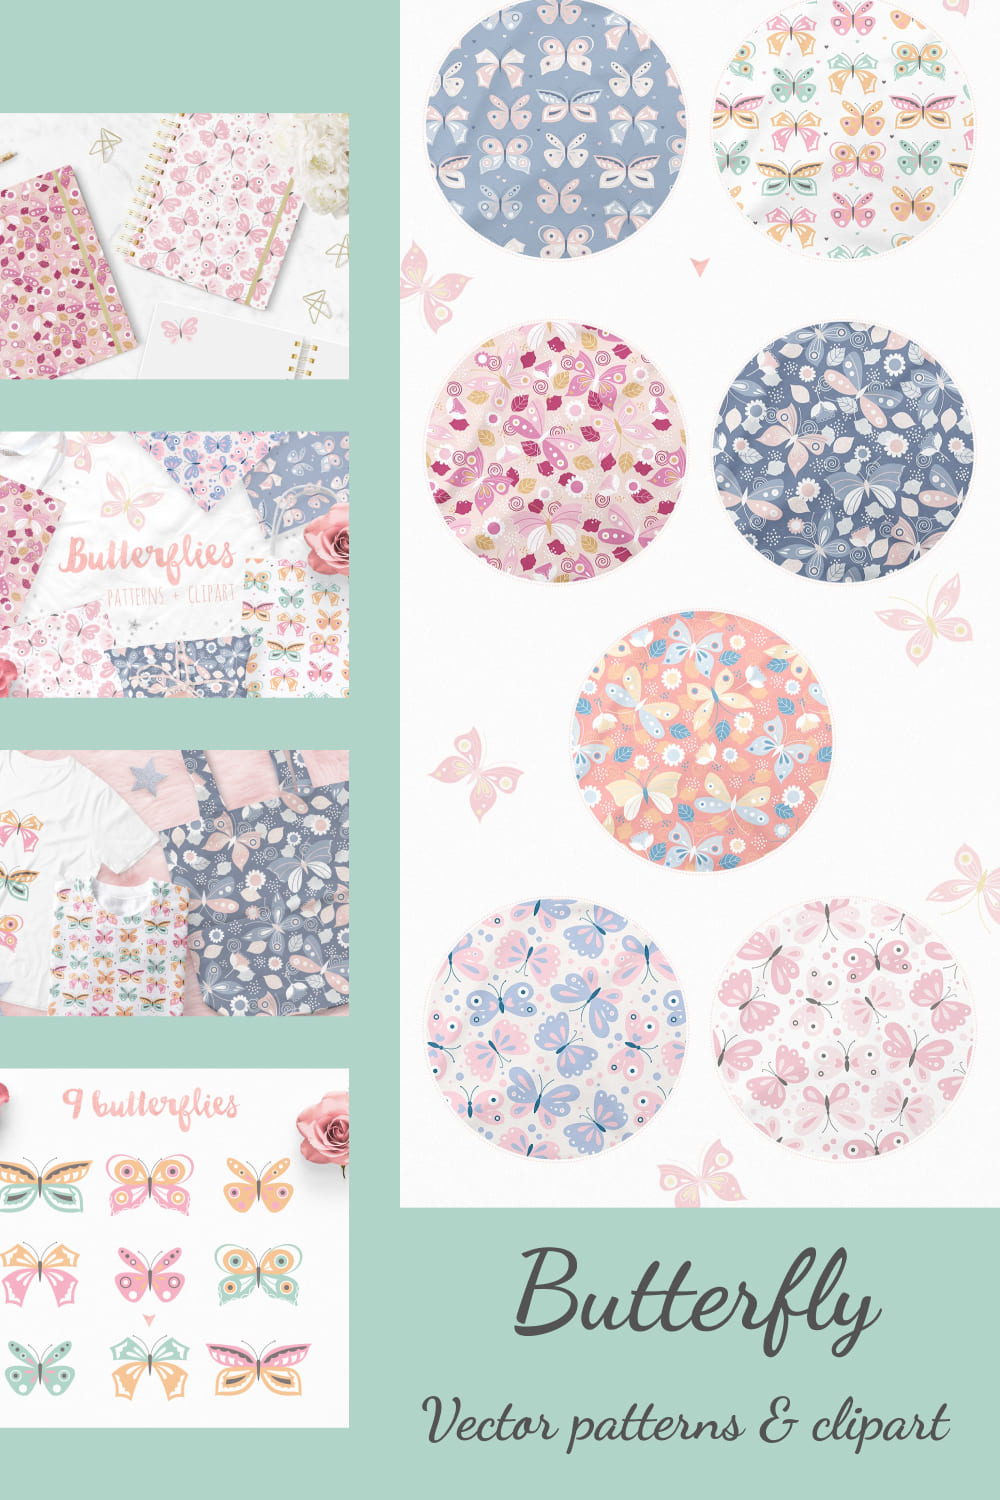 butterfly vector patterns 04 1000x1500 1